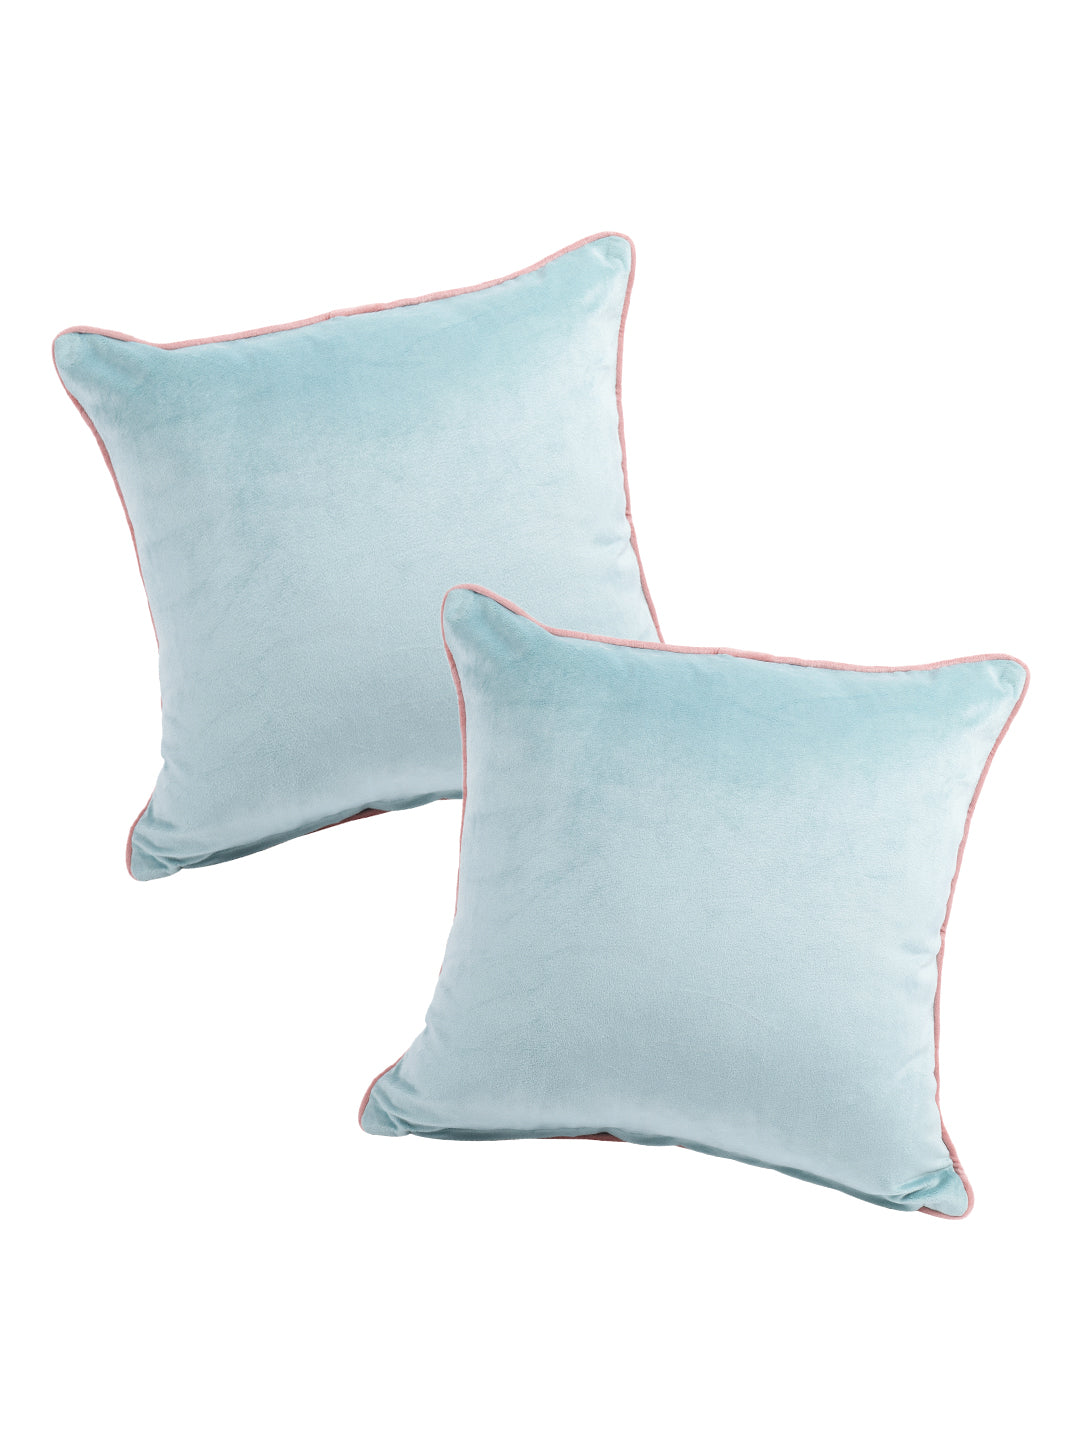 Turquoise Blue & Pink Set of 2 Velvet Square Cushion Covers